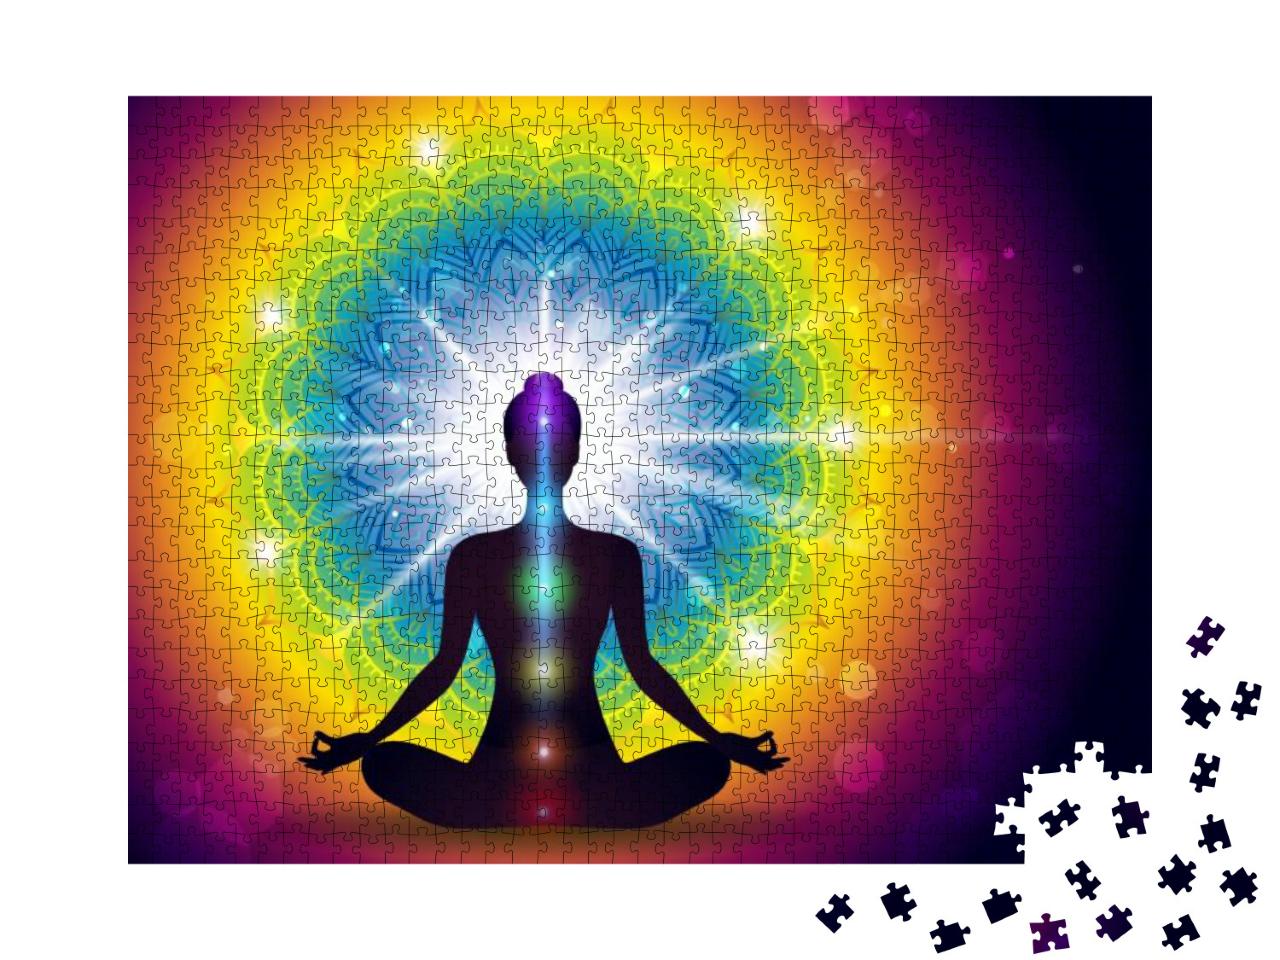 Mudra Yoga Energy-Effects & Gradient Mesh-Eps 10... Jigsaw Puzzle with 1000 pieces